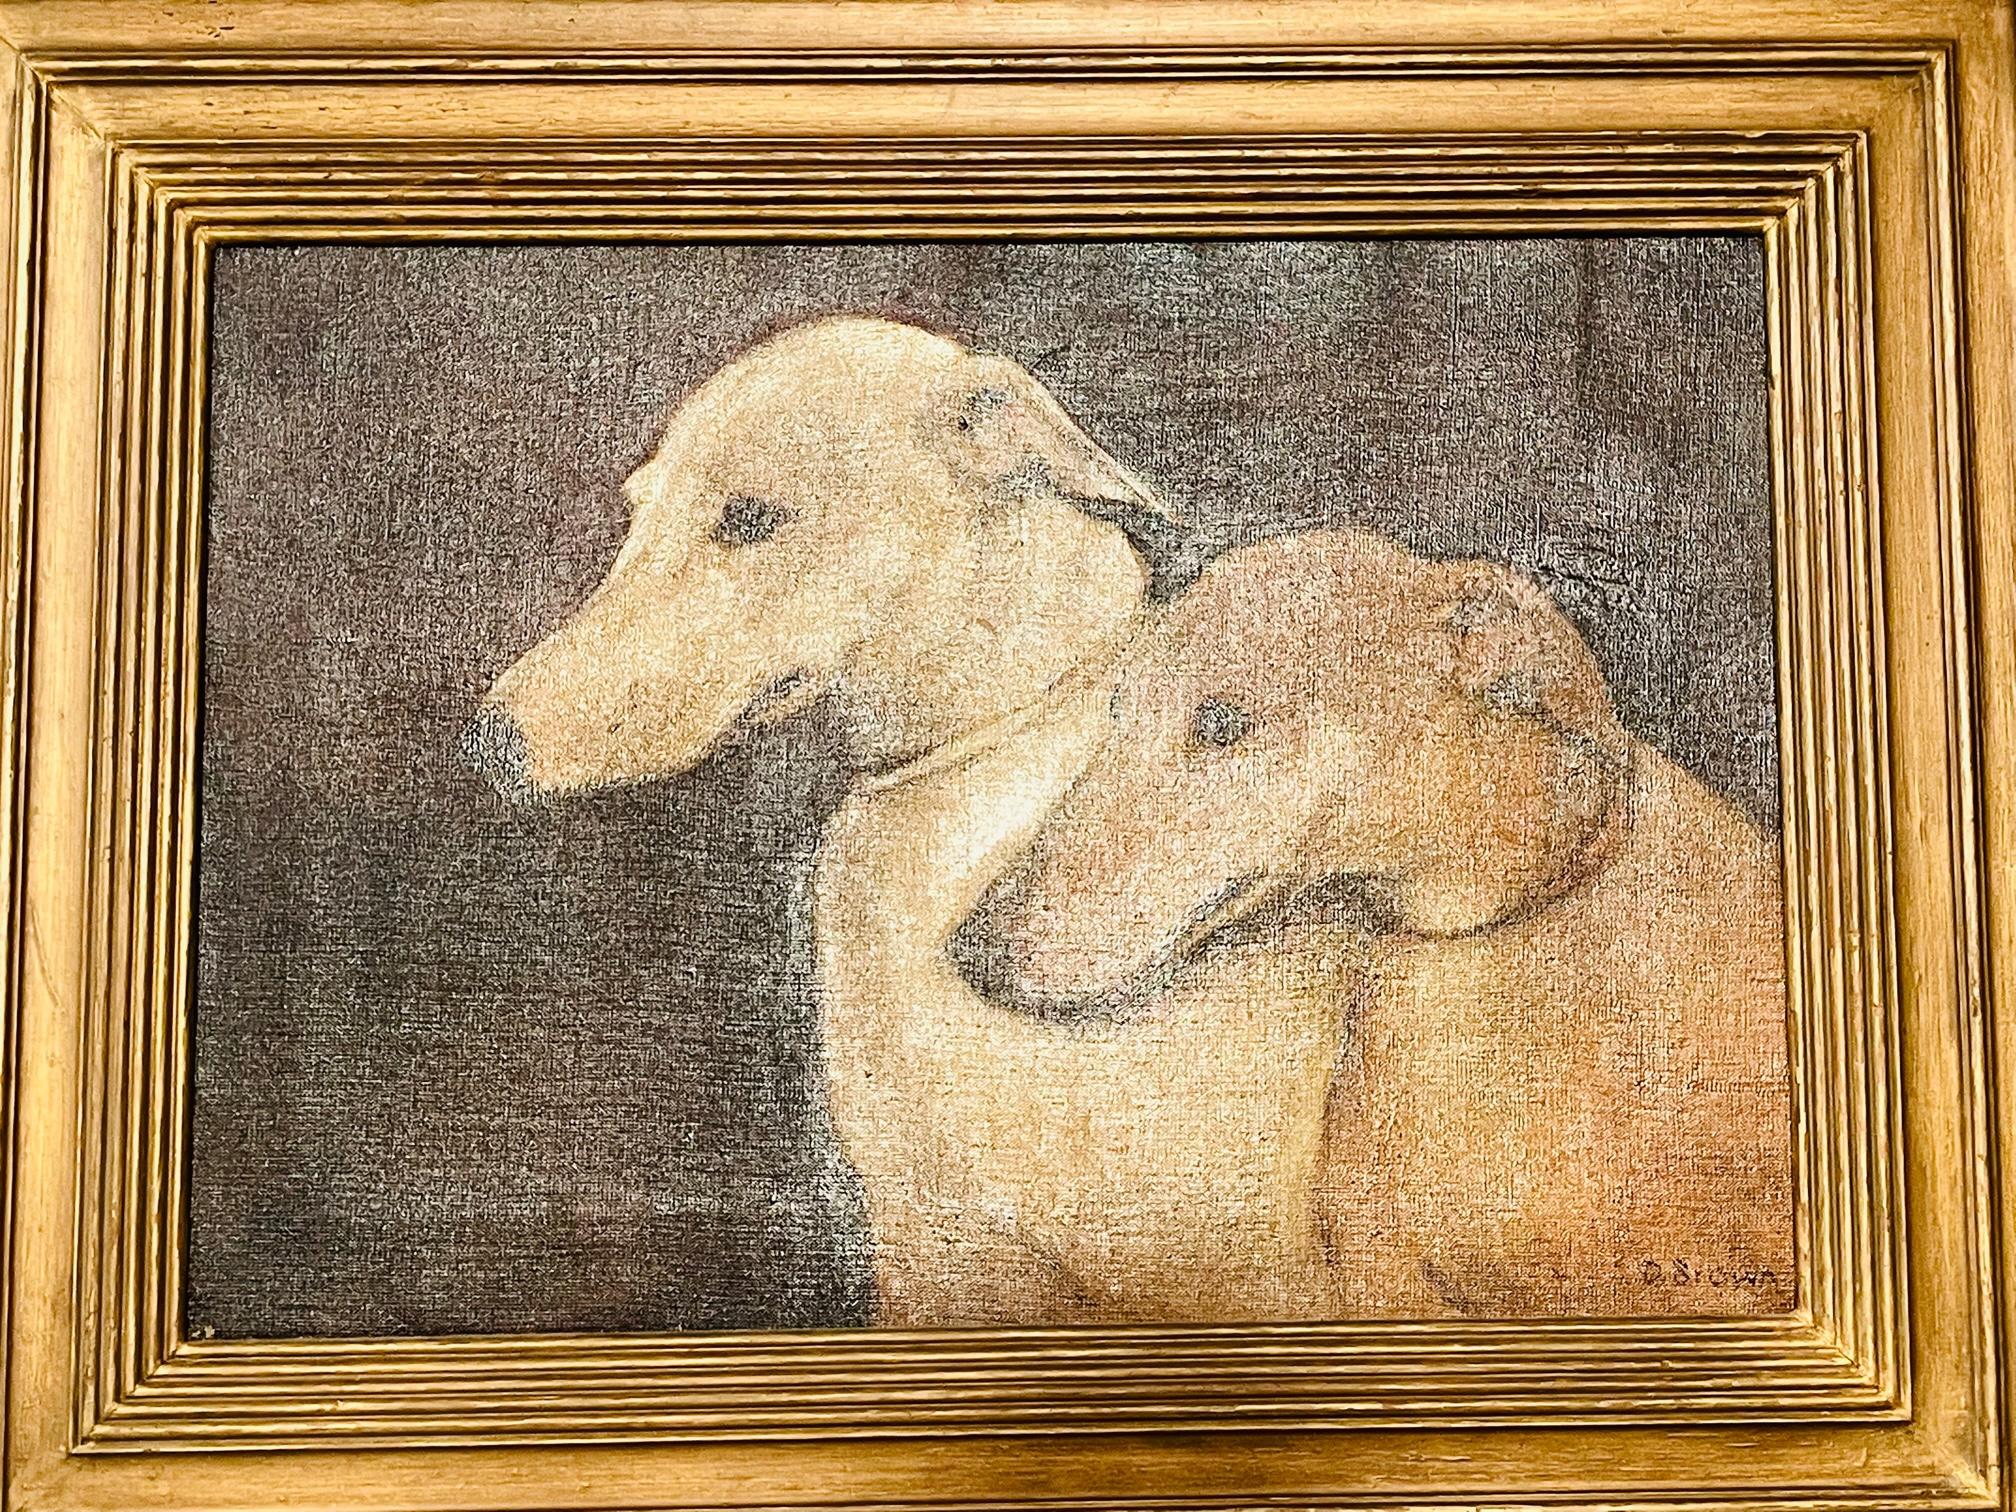 Modern Two Dogs Side Portrait Oil on Canvas Painting, Framed and Signed